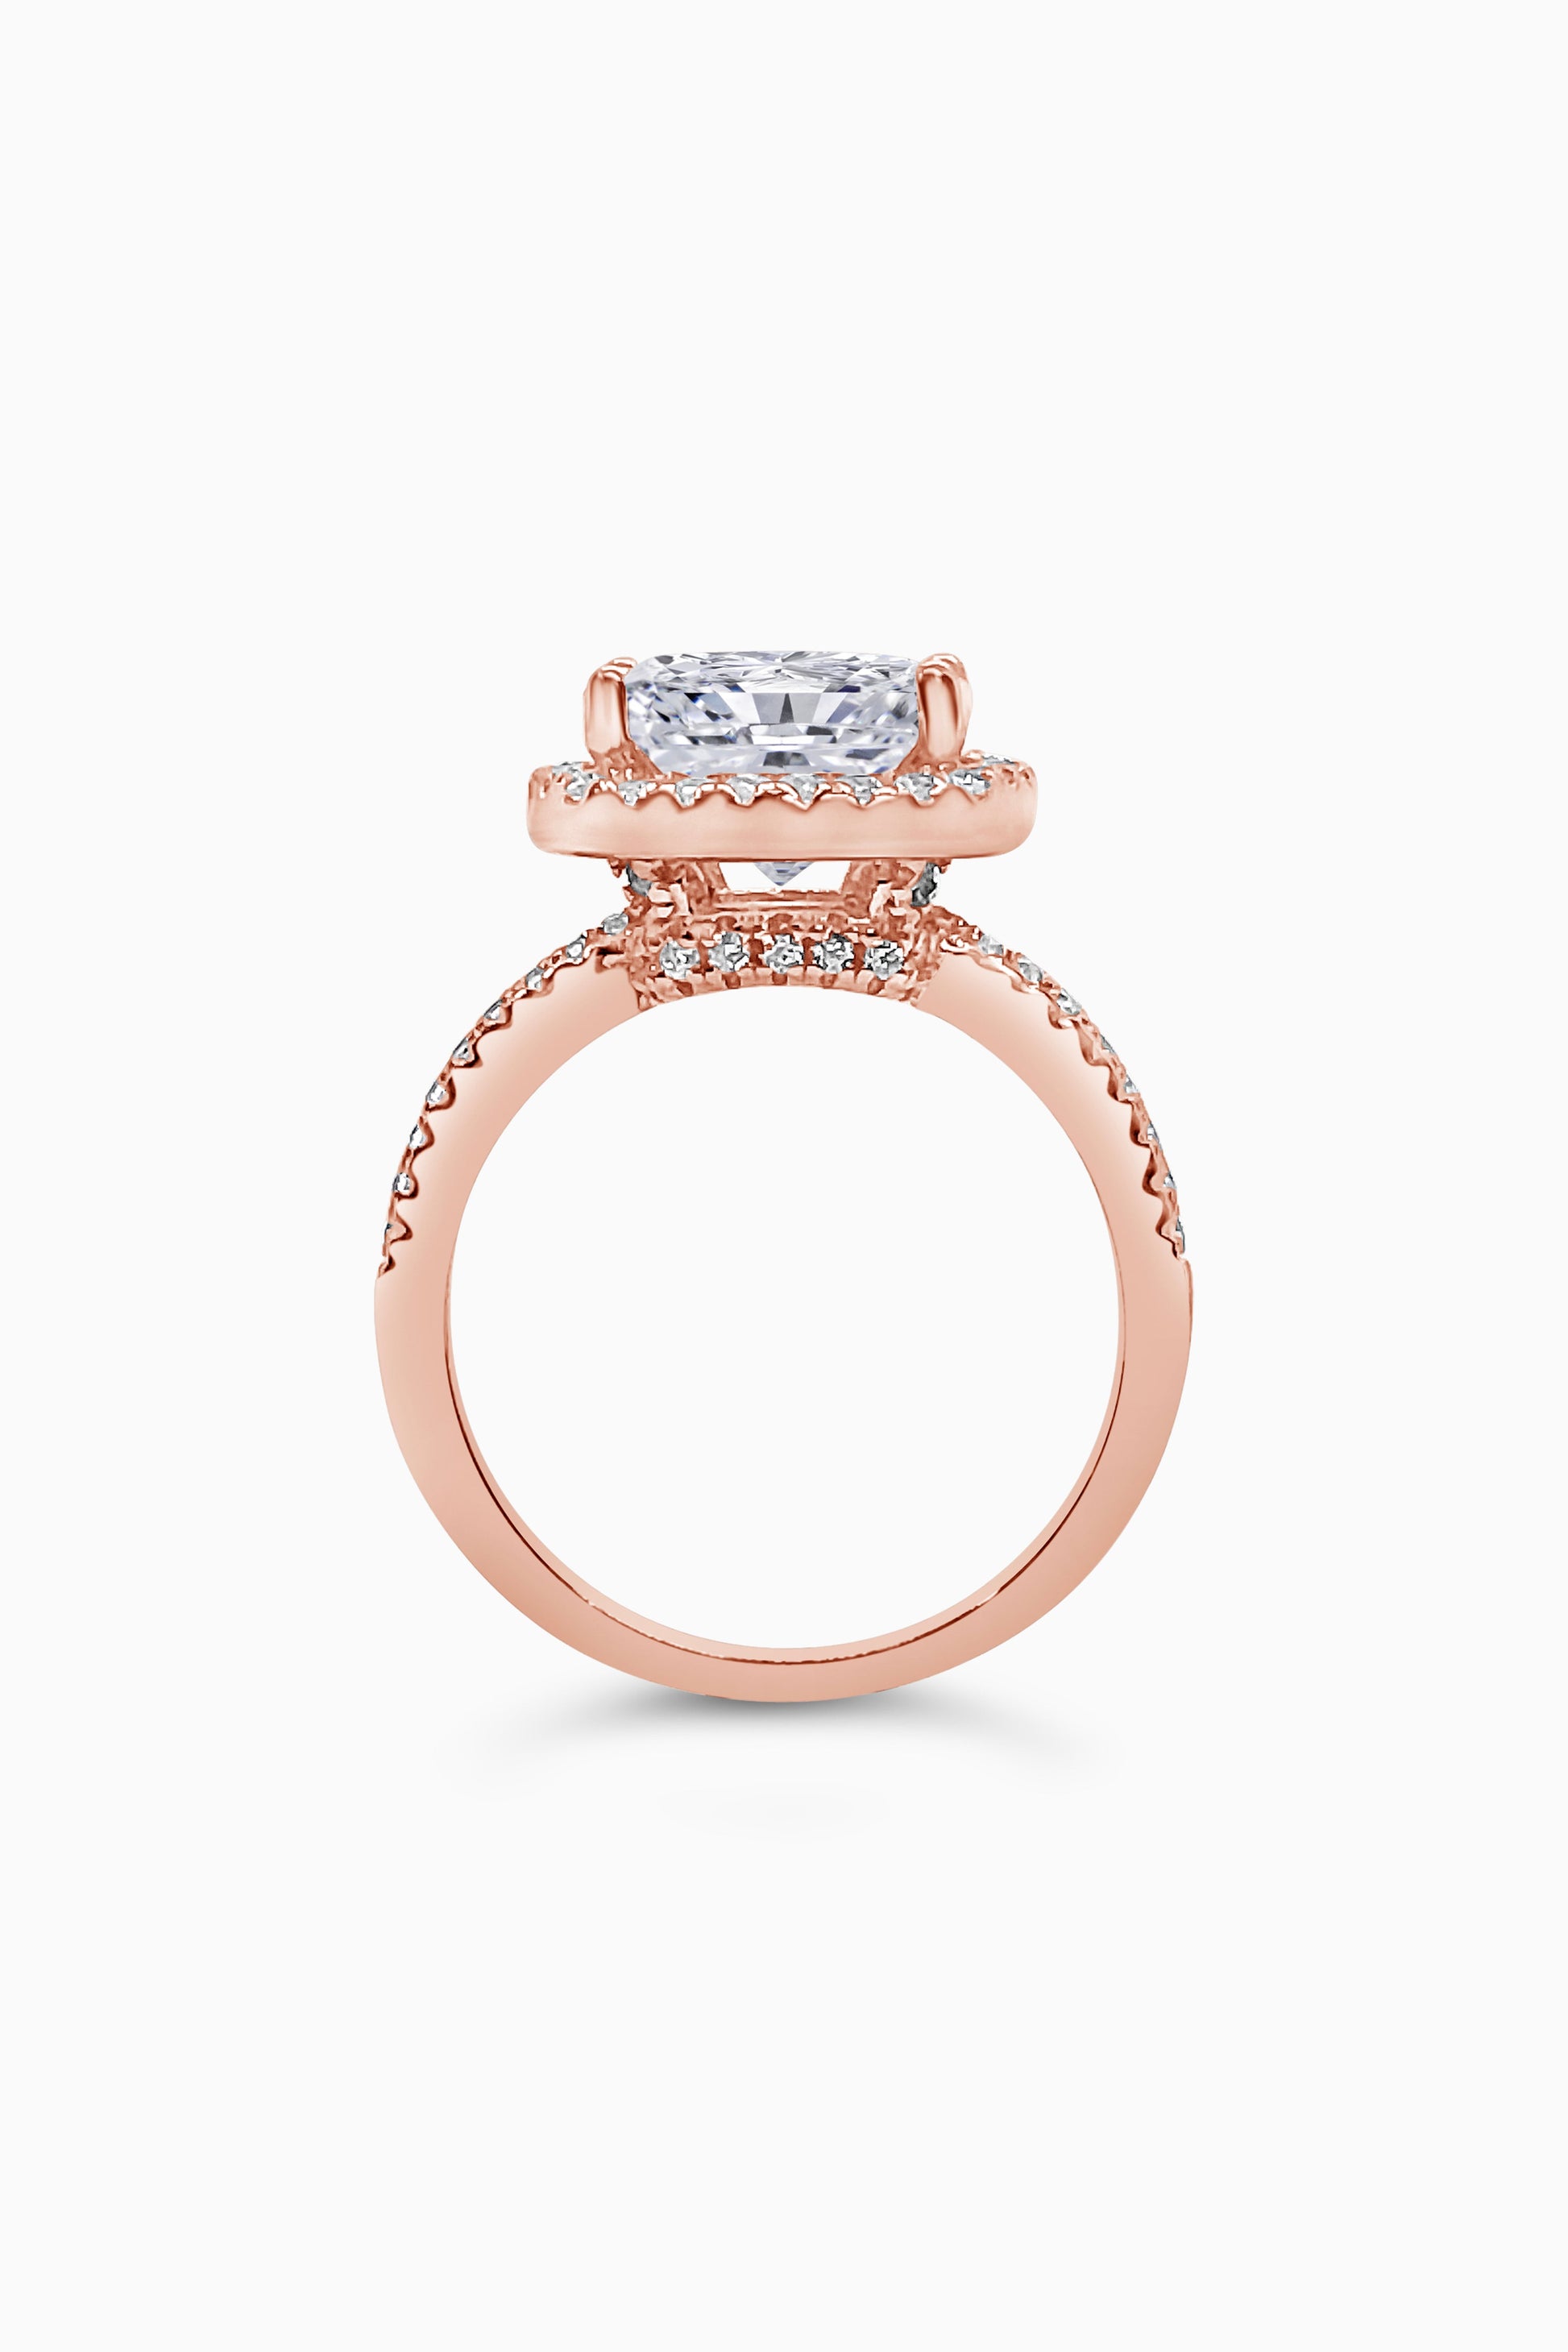 Rose Gold Large Cushion Cut with Surrounding Halo and Pavé stones all along the prongs, crown, and band - Side View